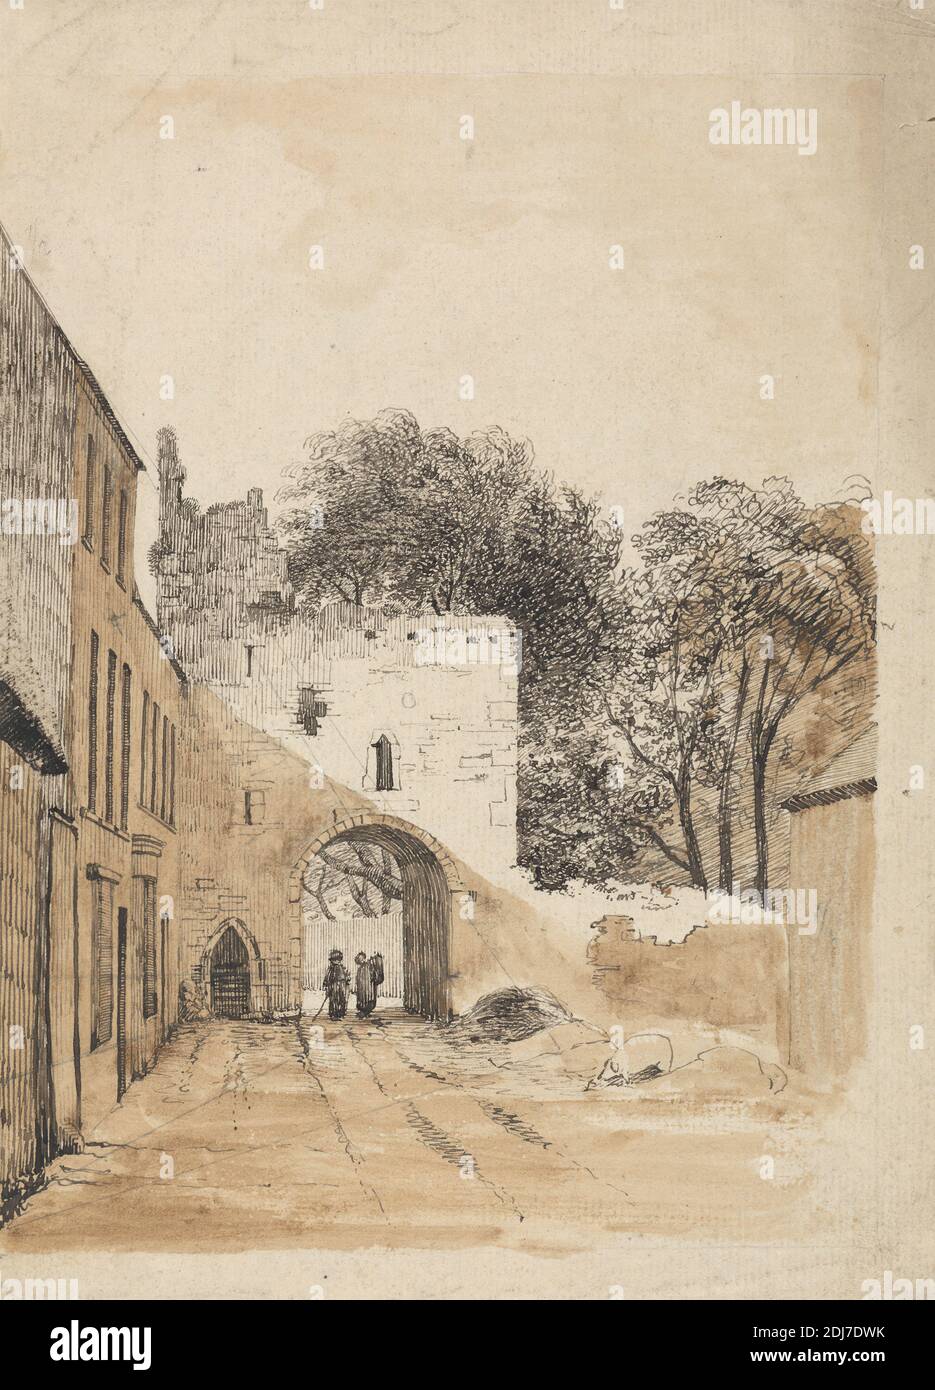 Ruined Gateway at Kilmallock, Thomas Crofton Croker, 1798–1854, British, undated, Pen and black ink, pen and brown ink, brown wash, and graphite on medium, slightly textured, cream laid paper, Sheet: 9 1/8 × 6 5/8 inches (23.2 × 16.8 cm), arch, architectural subject, buildings, cityscape, figures, trees Stock Photo